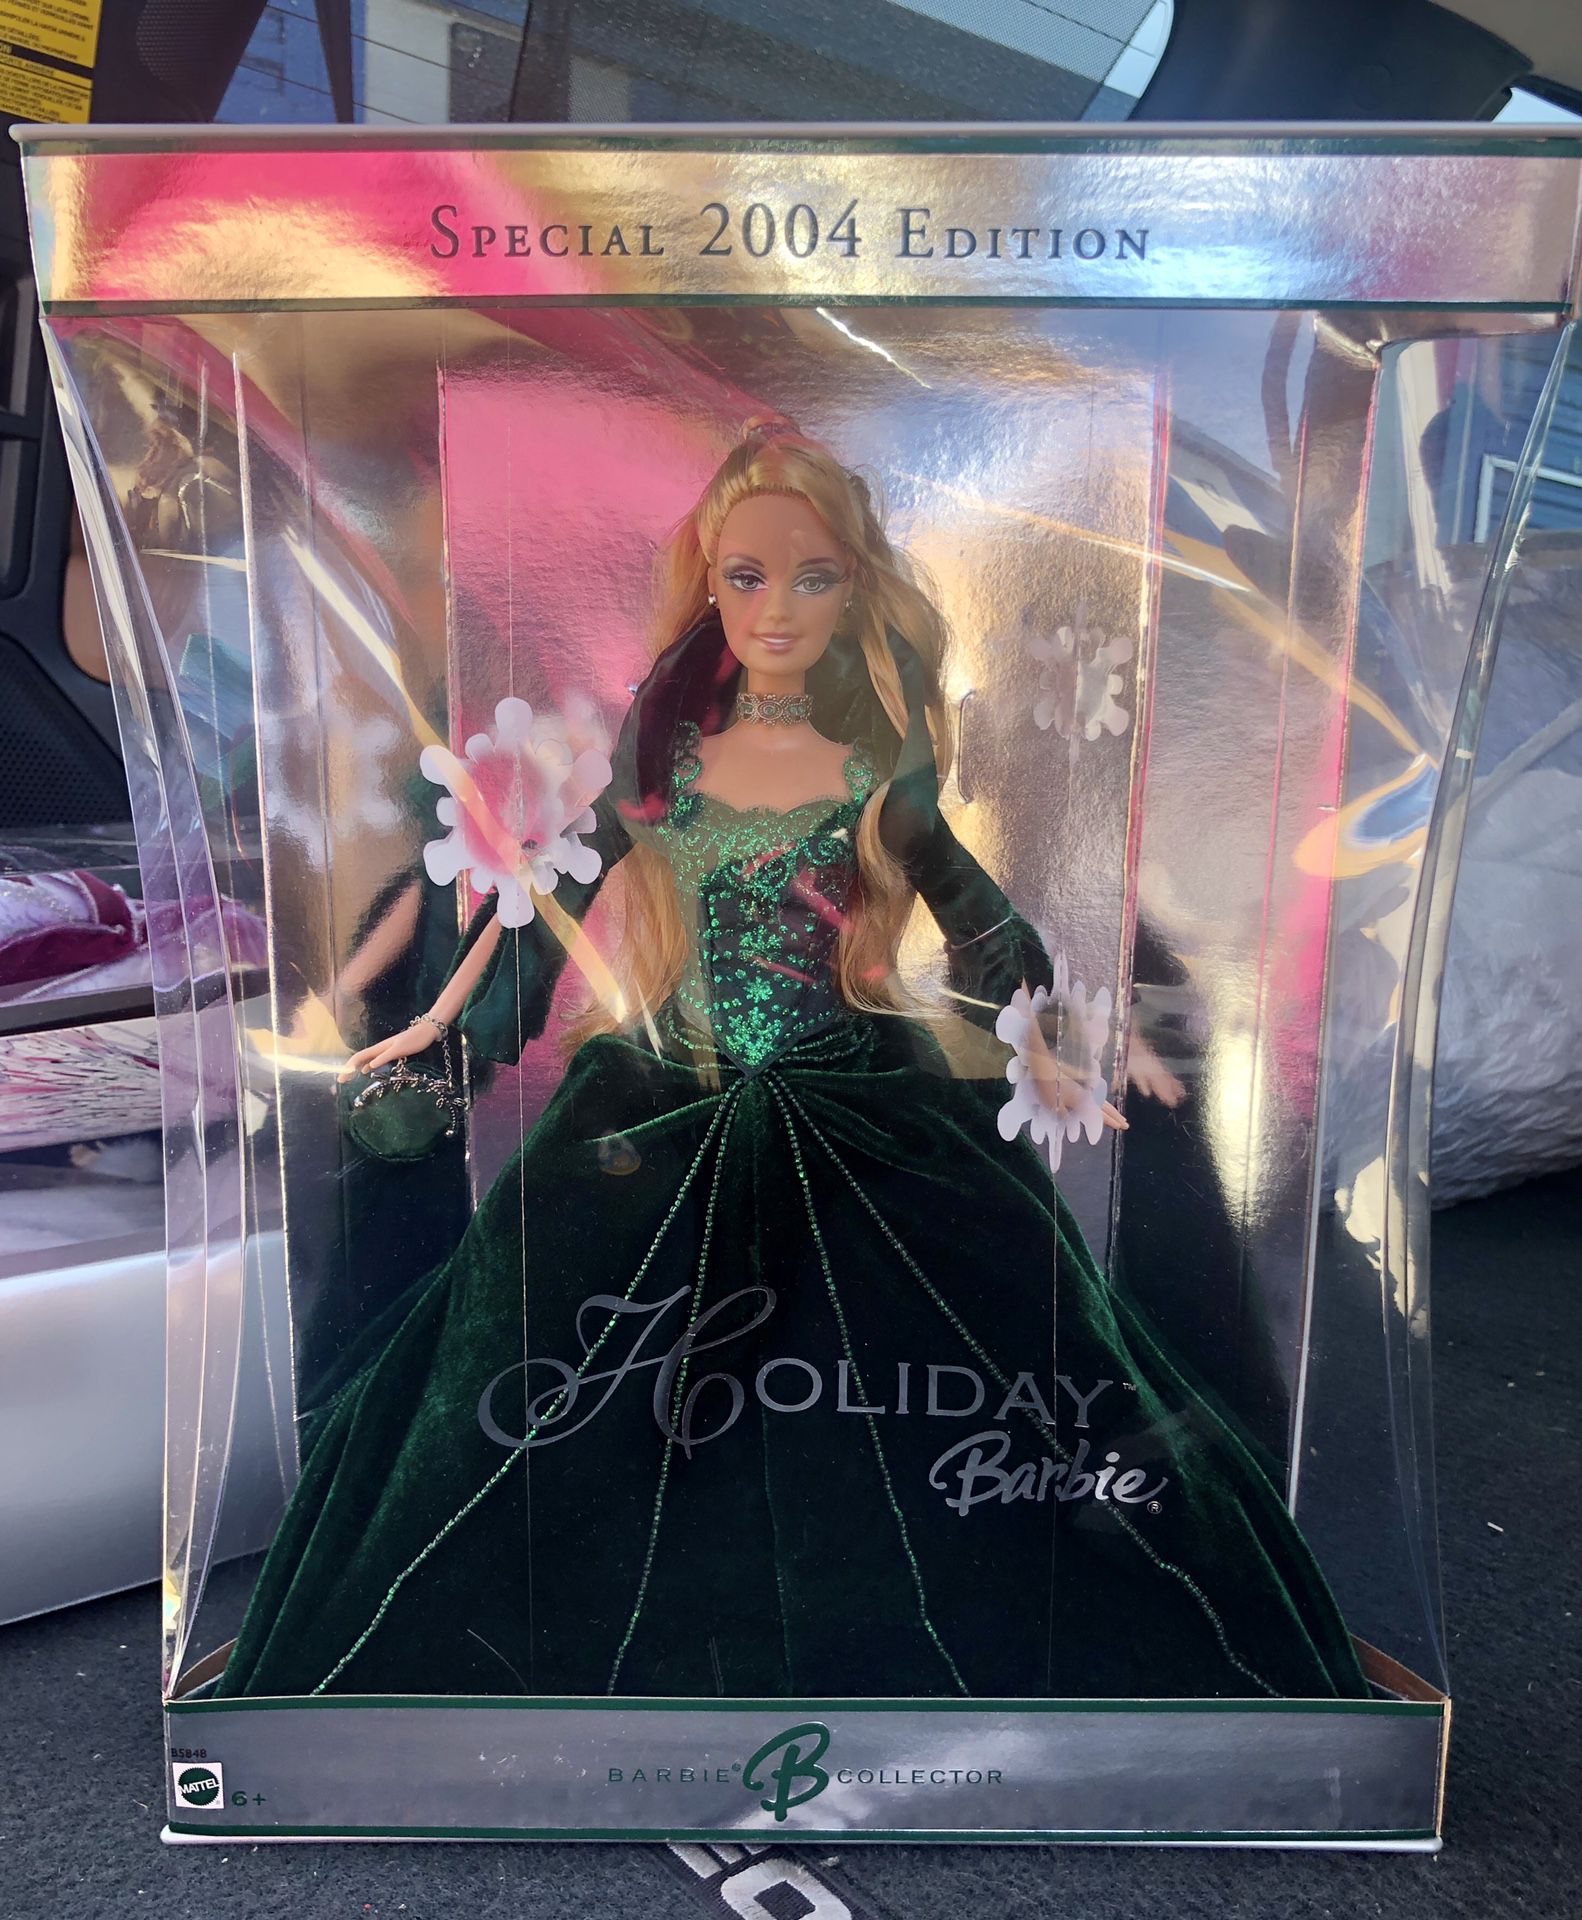 Special 2004 Edition Holiday Barbie